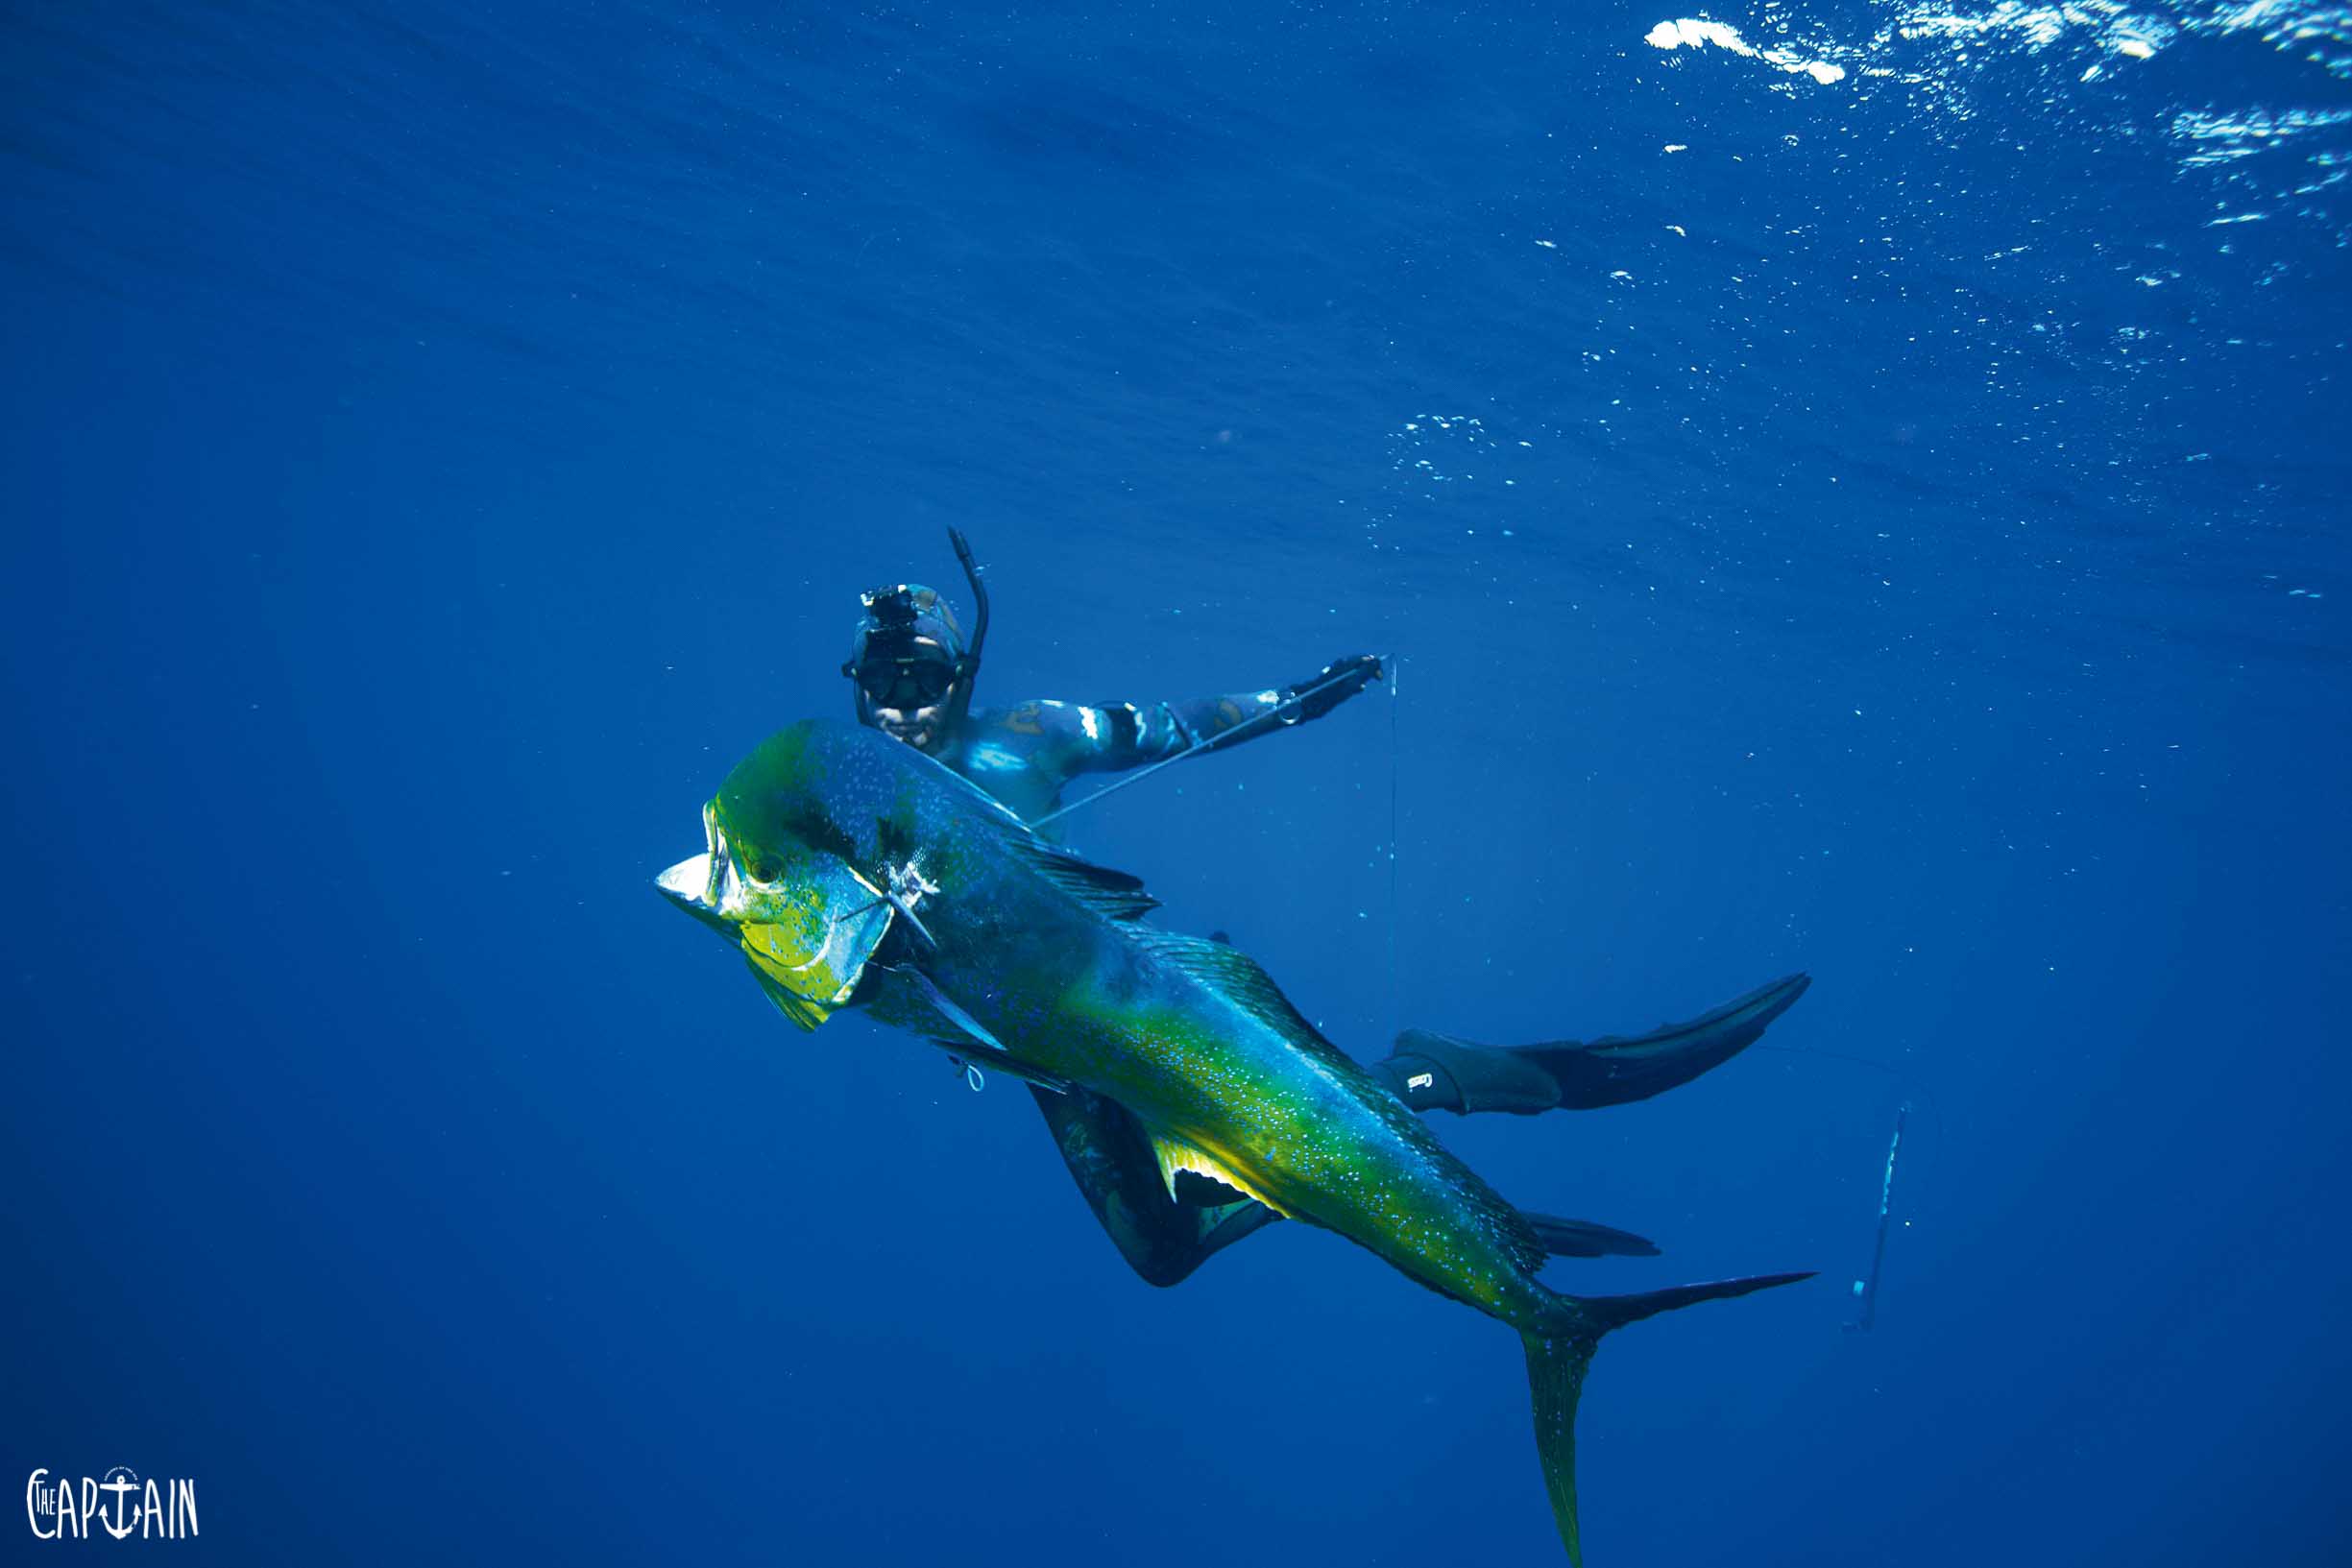 PAUL'S SPEARFISHING GEAR GUIDE - The Captain Magazine